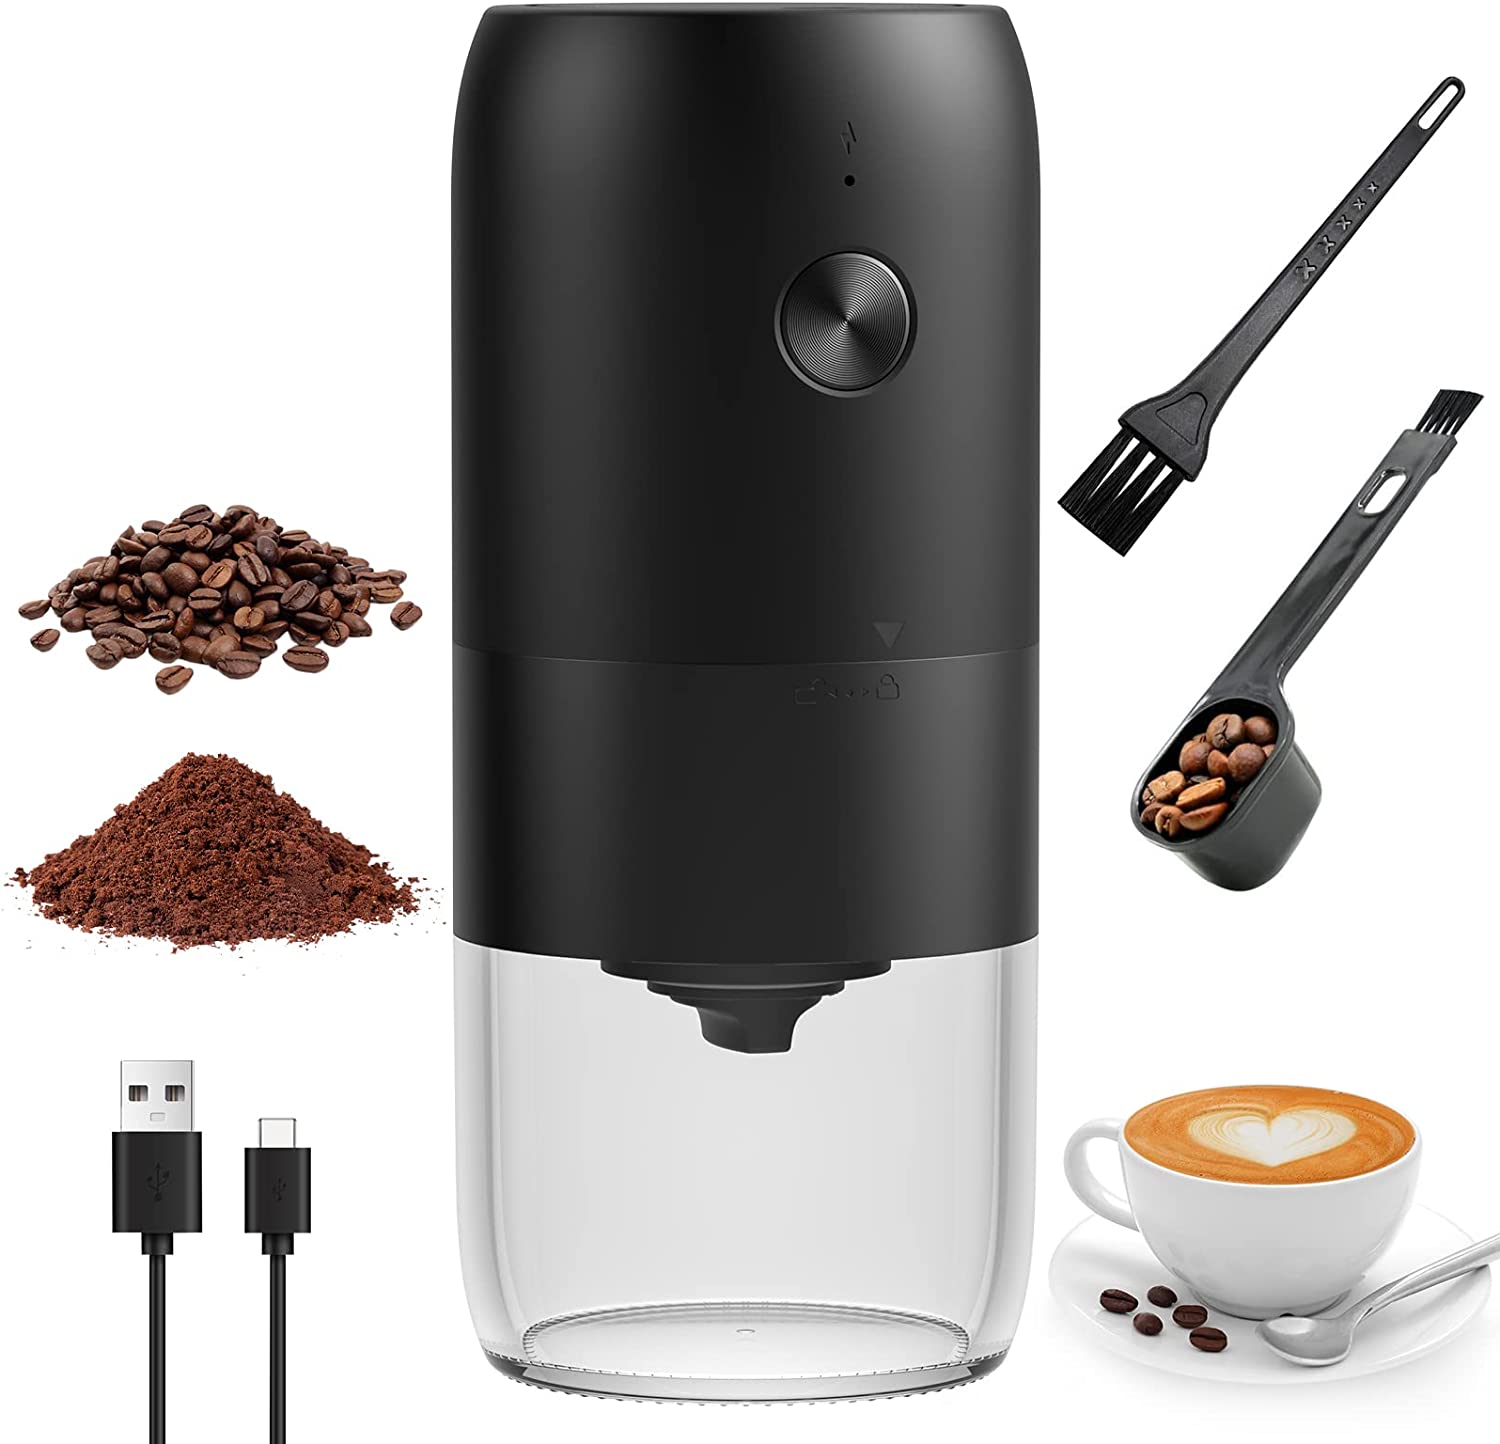 LIUWID Electric Coffee Grinder with Ceramic Cone Grinder, Coffee Bean Mill, Electric with Adjustable Coarseness, Portable Rechargeable Coffee Grinder, 30 g Capacity for Coffee Beans